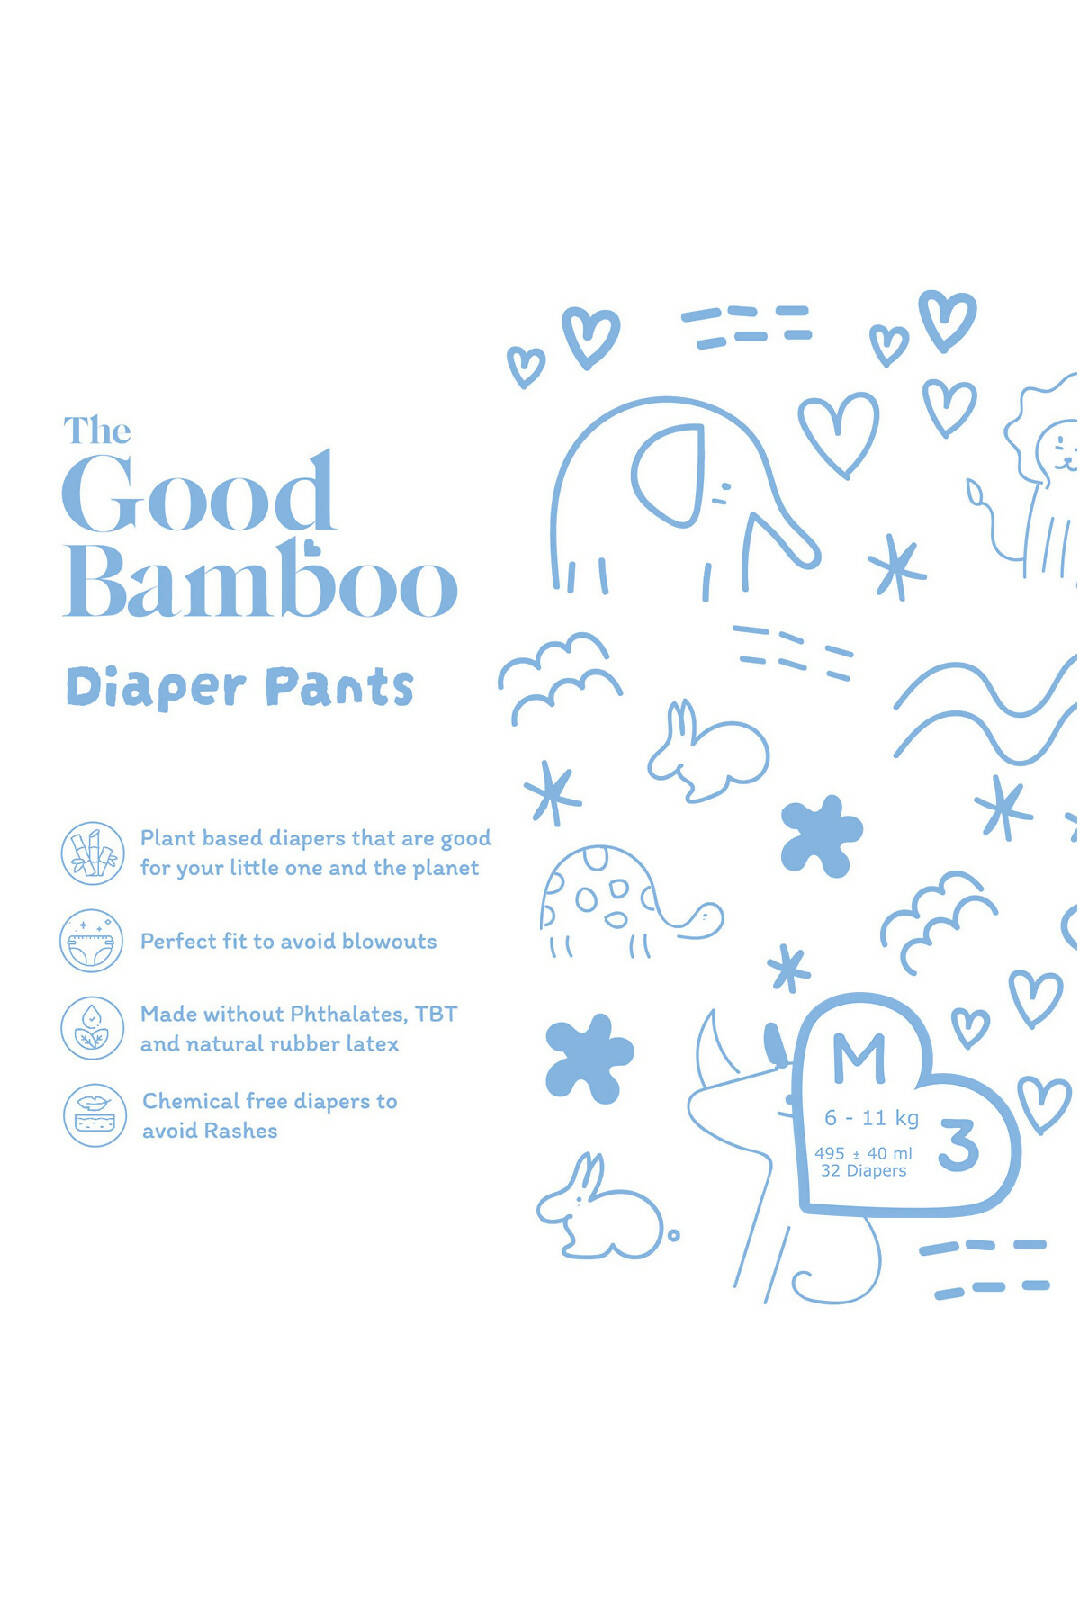 Bamboo Diapers - Medium Size (6-11 Kgs) - Tape Style - 32 Diapers